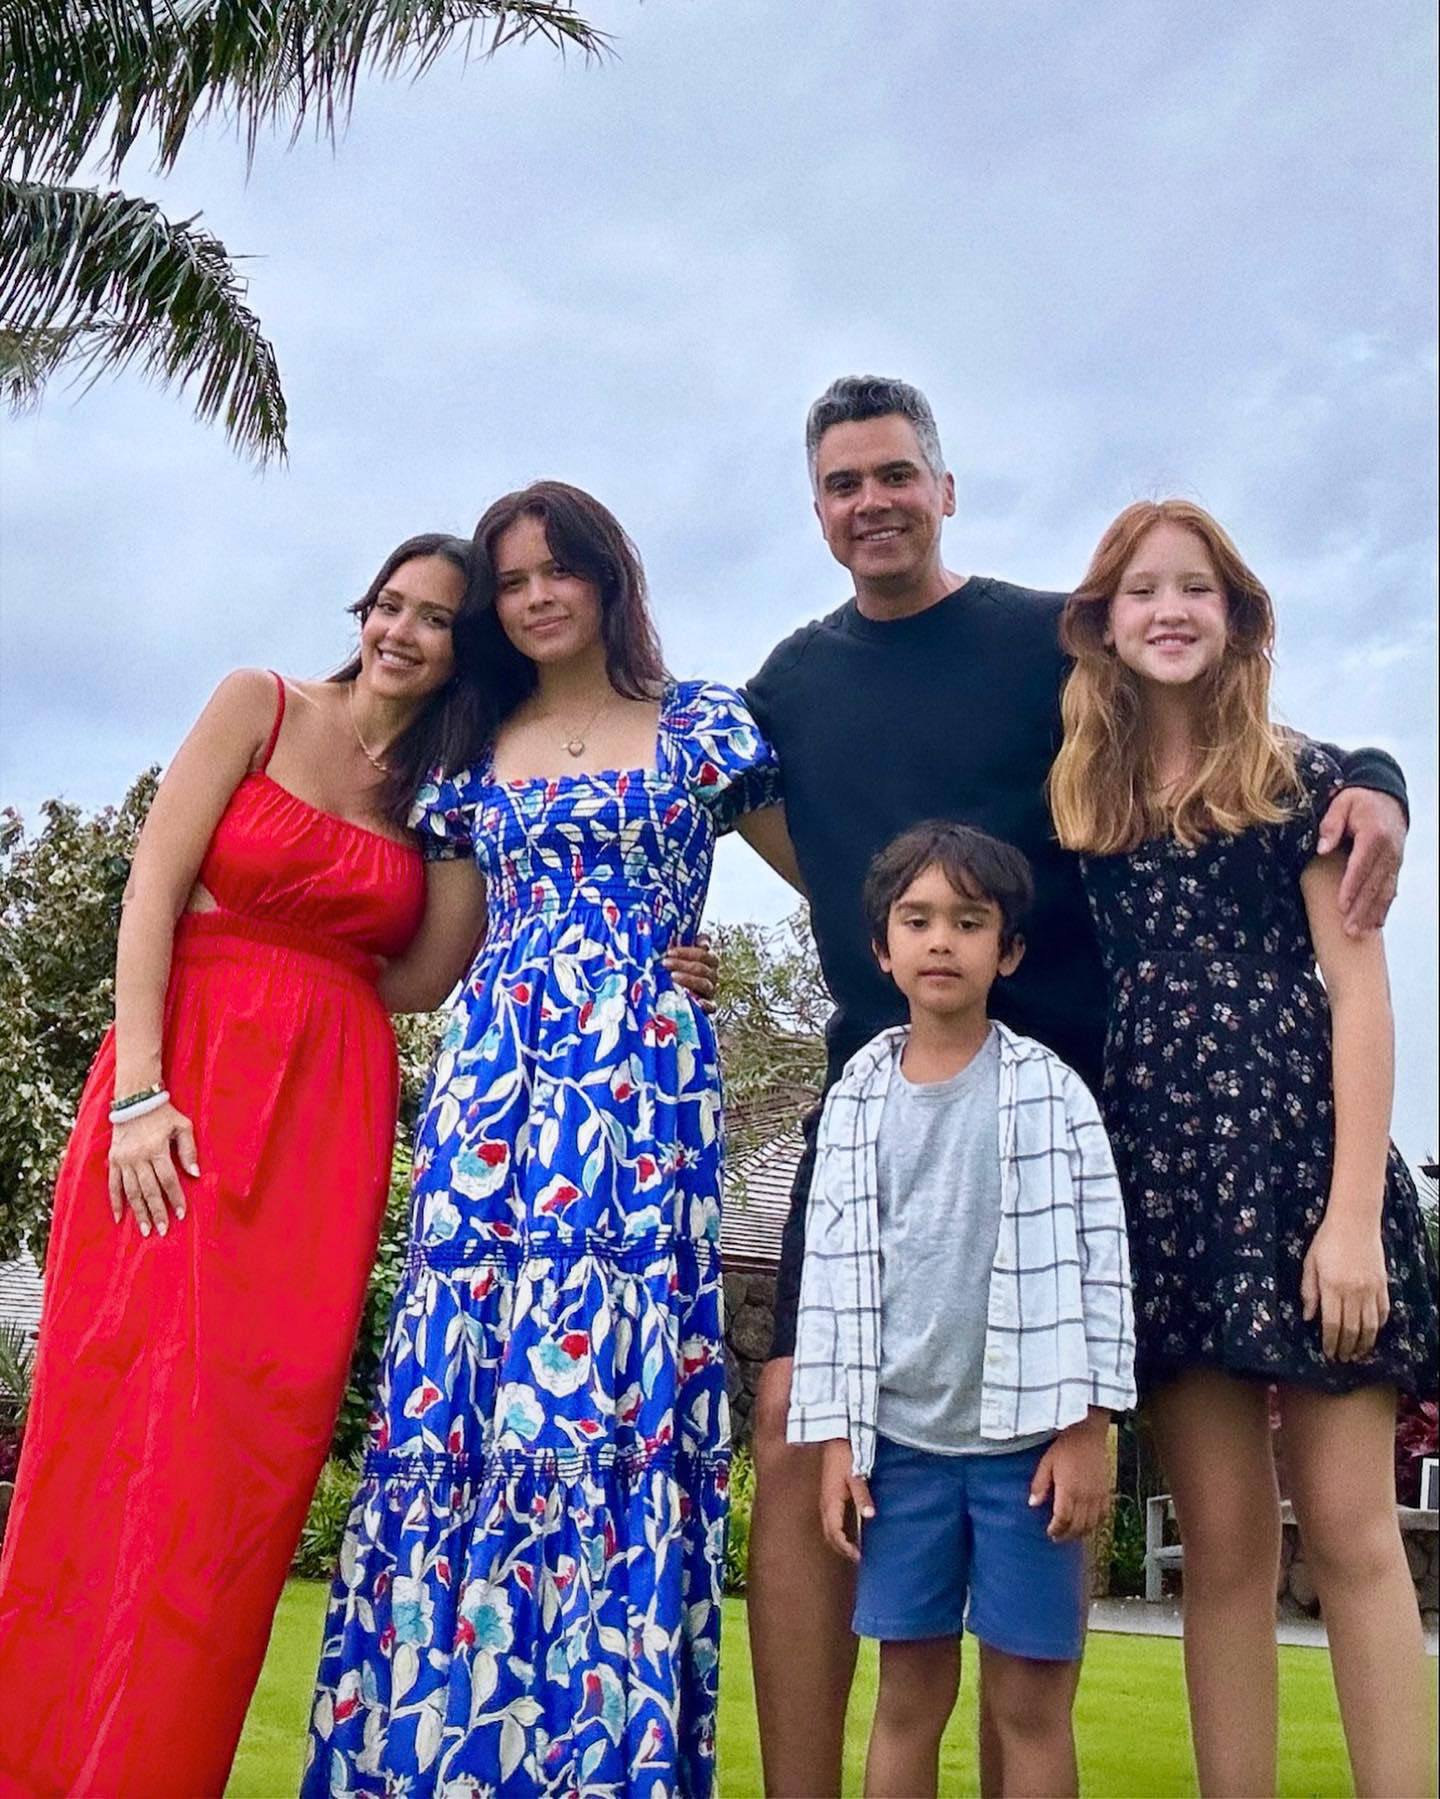 Jessica Alba and Husband Cash Warren’s Family Photos With Their 3 Kids Over the Years